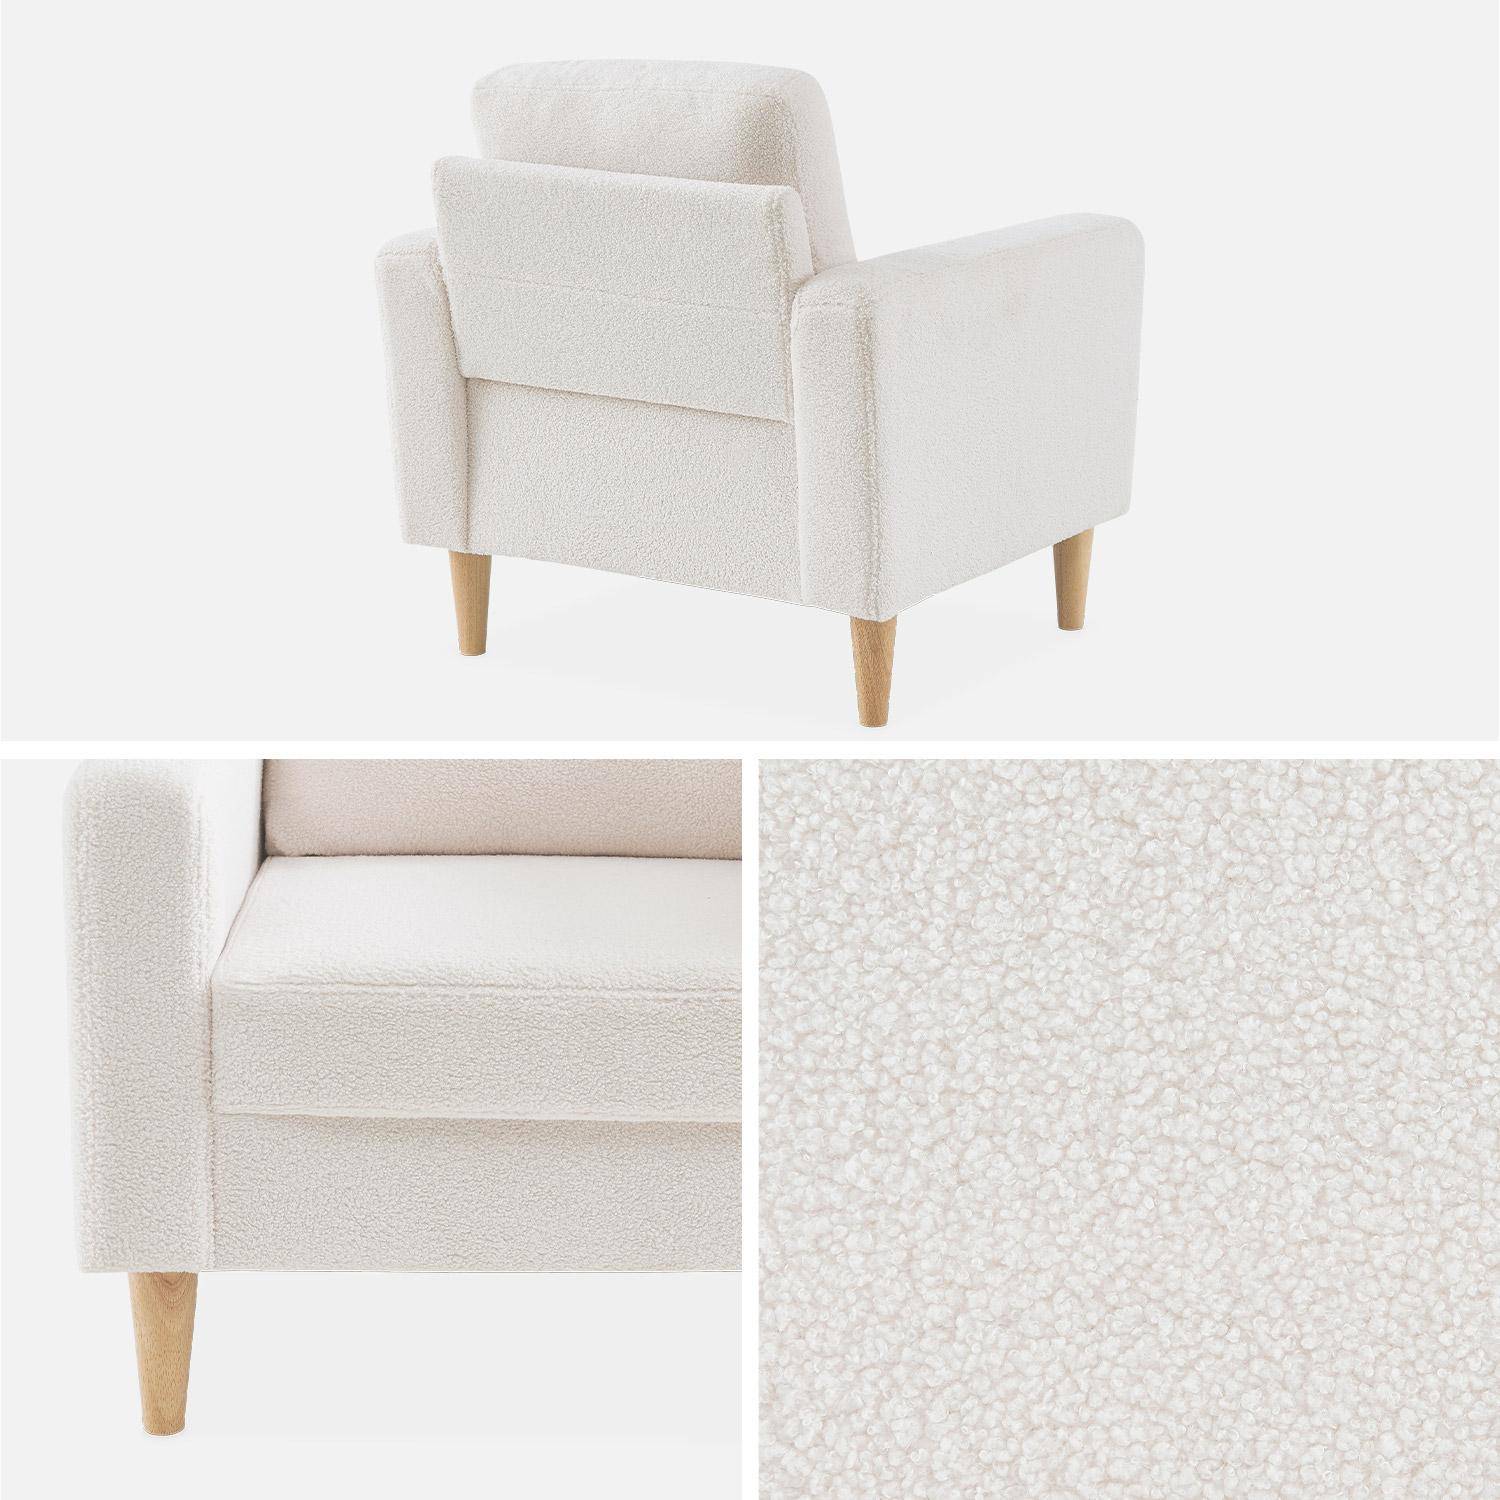 Scandi-style armchair with wooden legs - Bjorn - white boucle Photo5